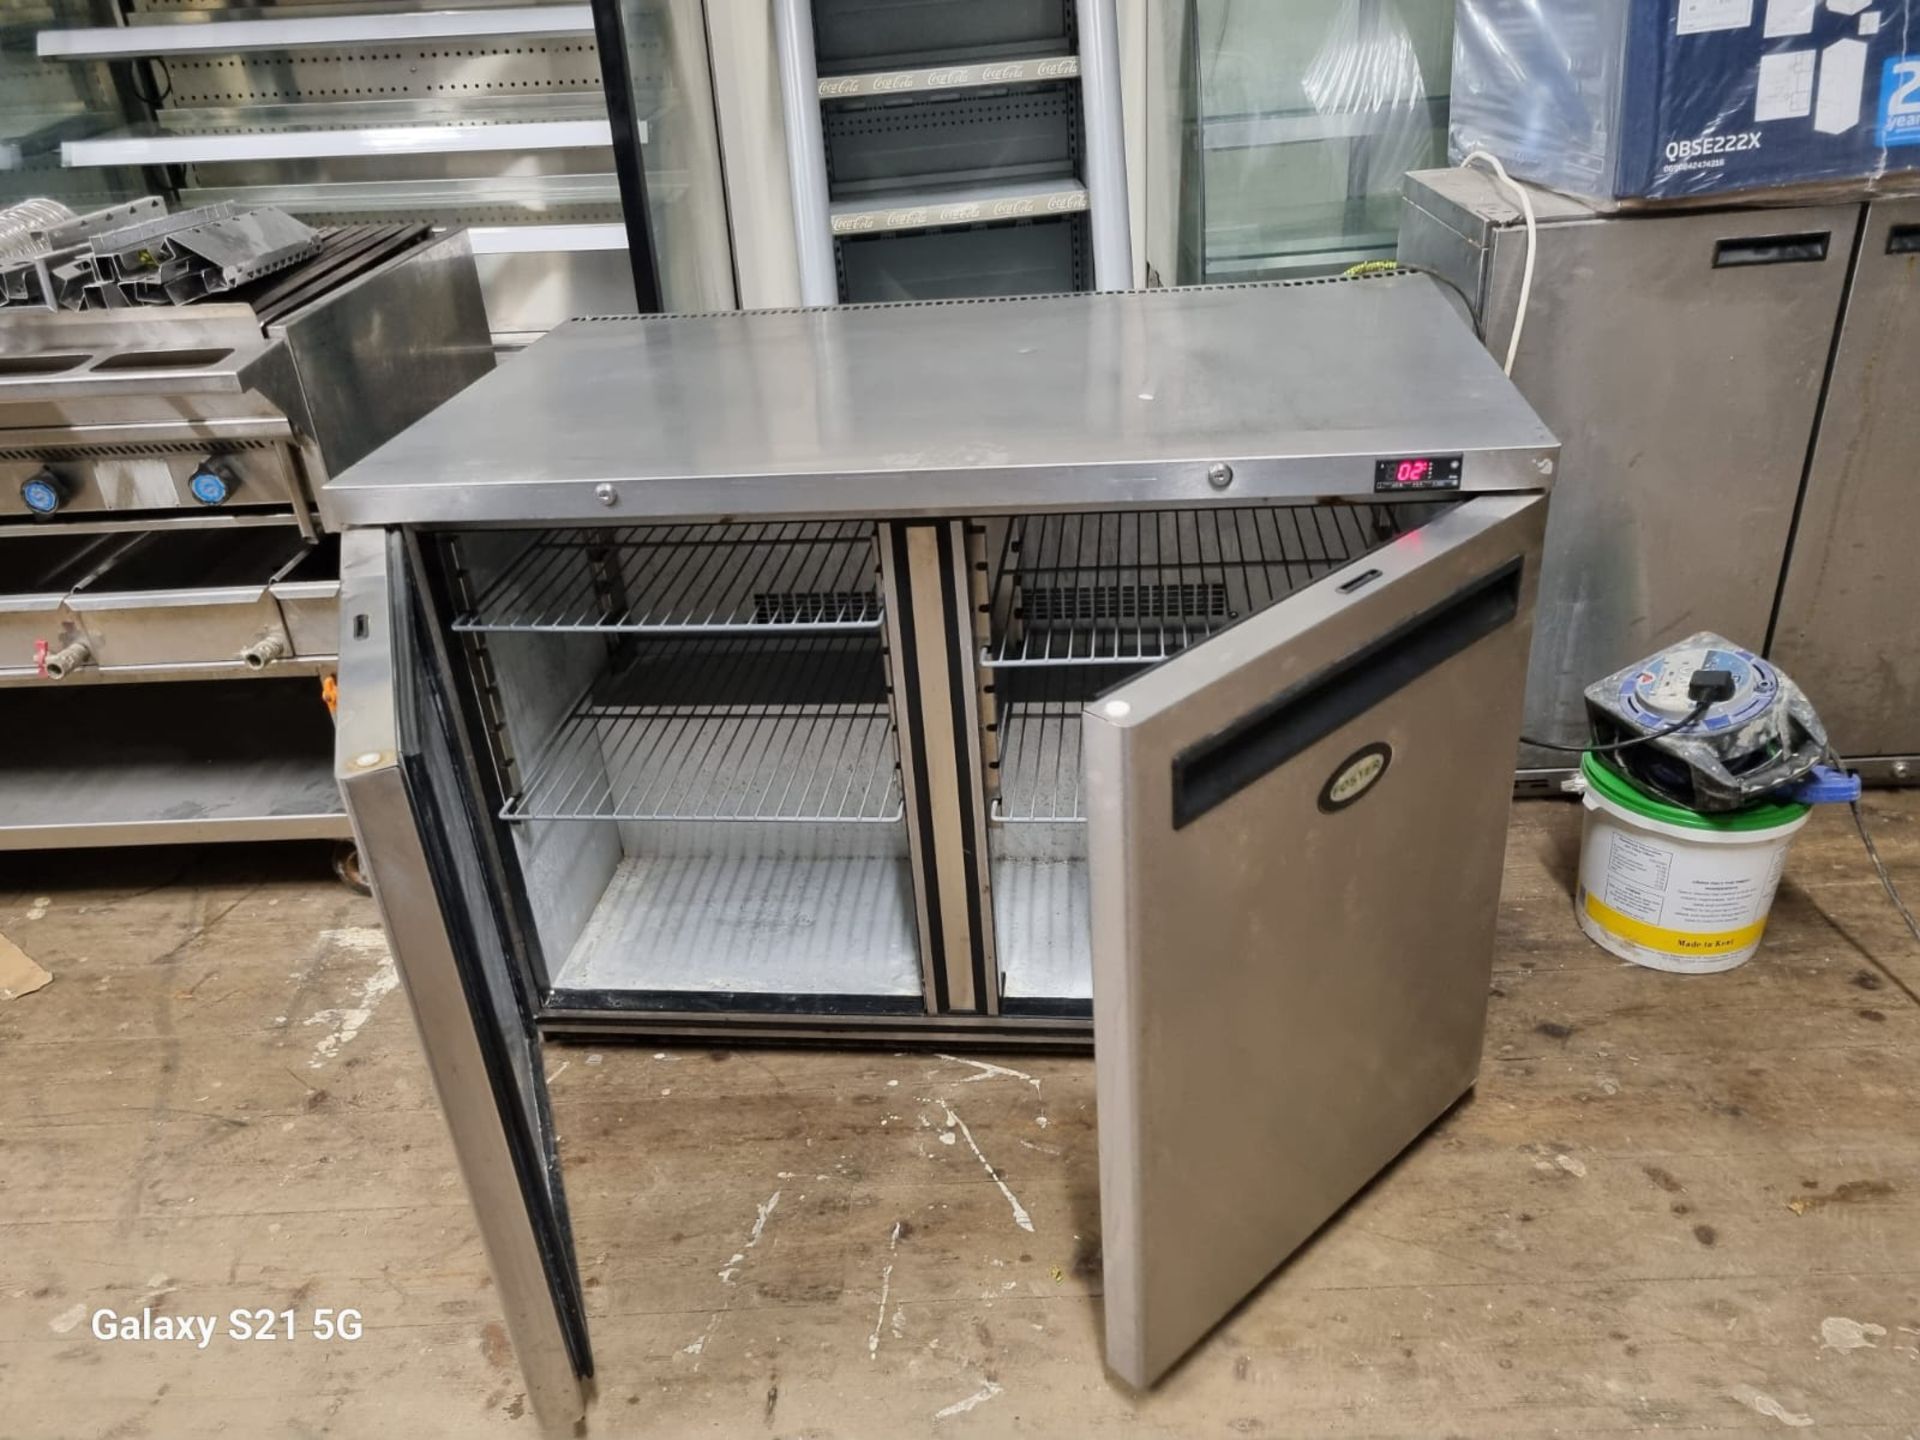 FOSTER HR360 UNDER COUNTER FRIDGE - 1200 MM W 700 MM D - FULLY WORKING - Image 4 of 6